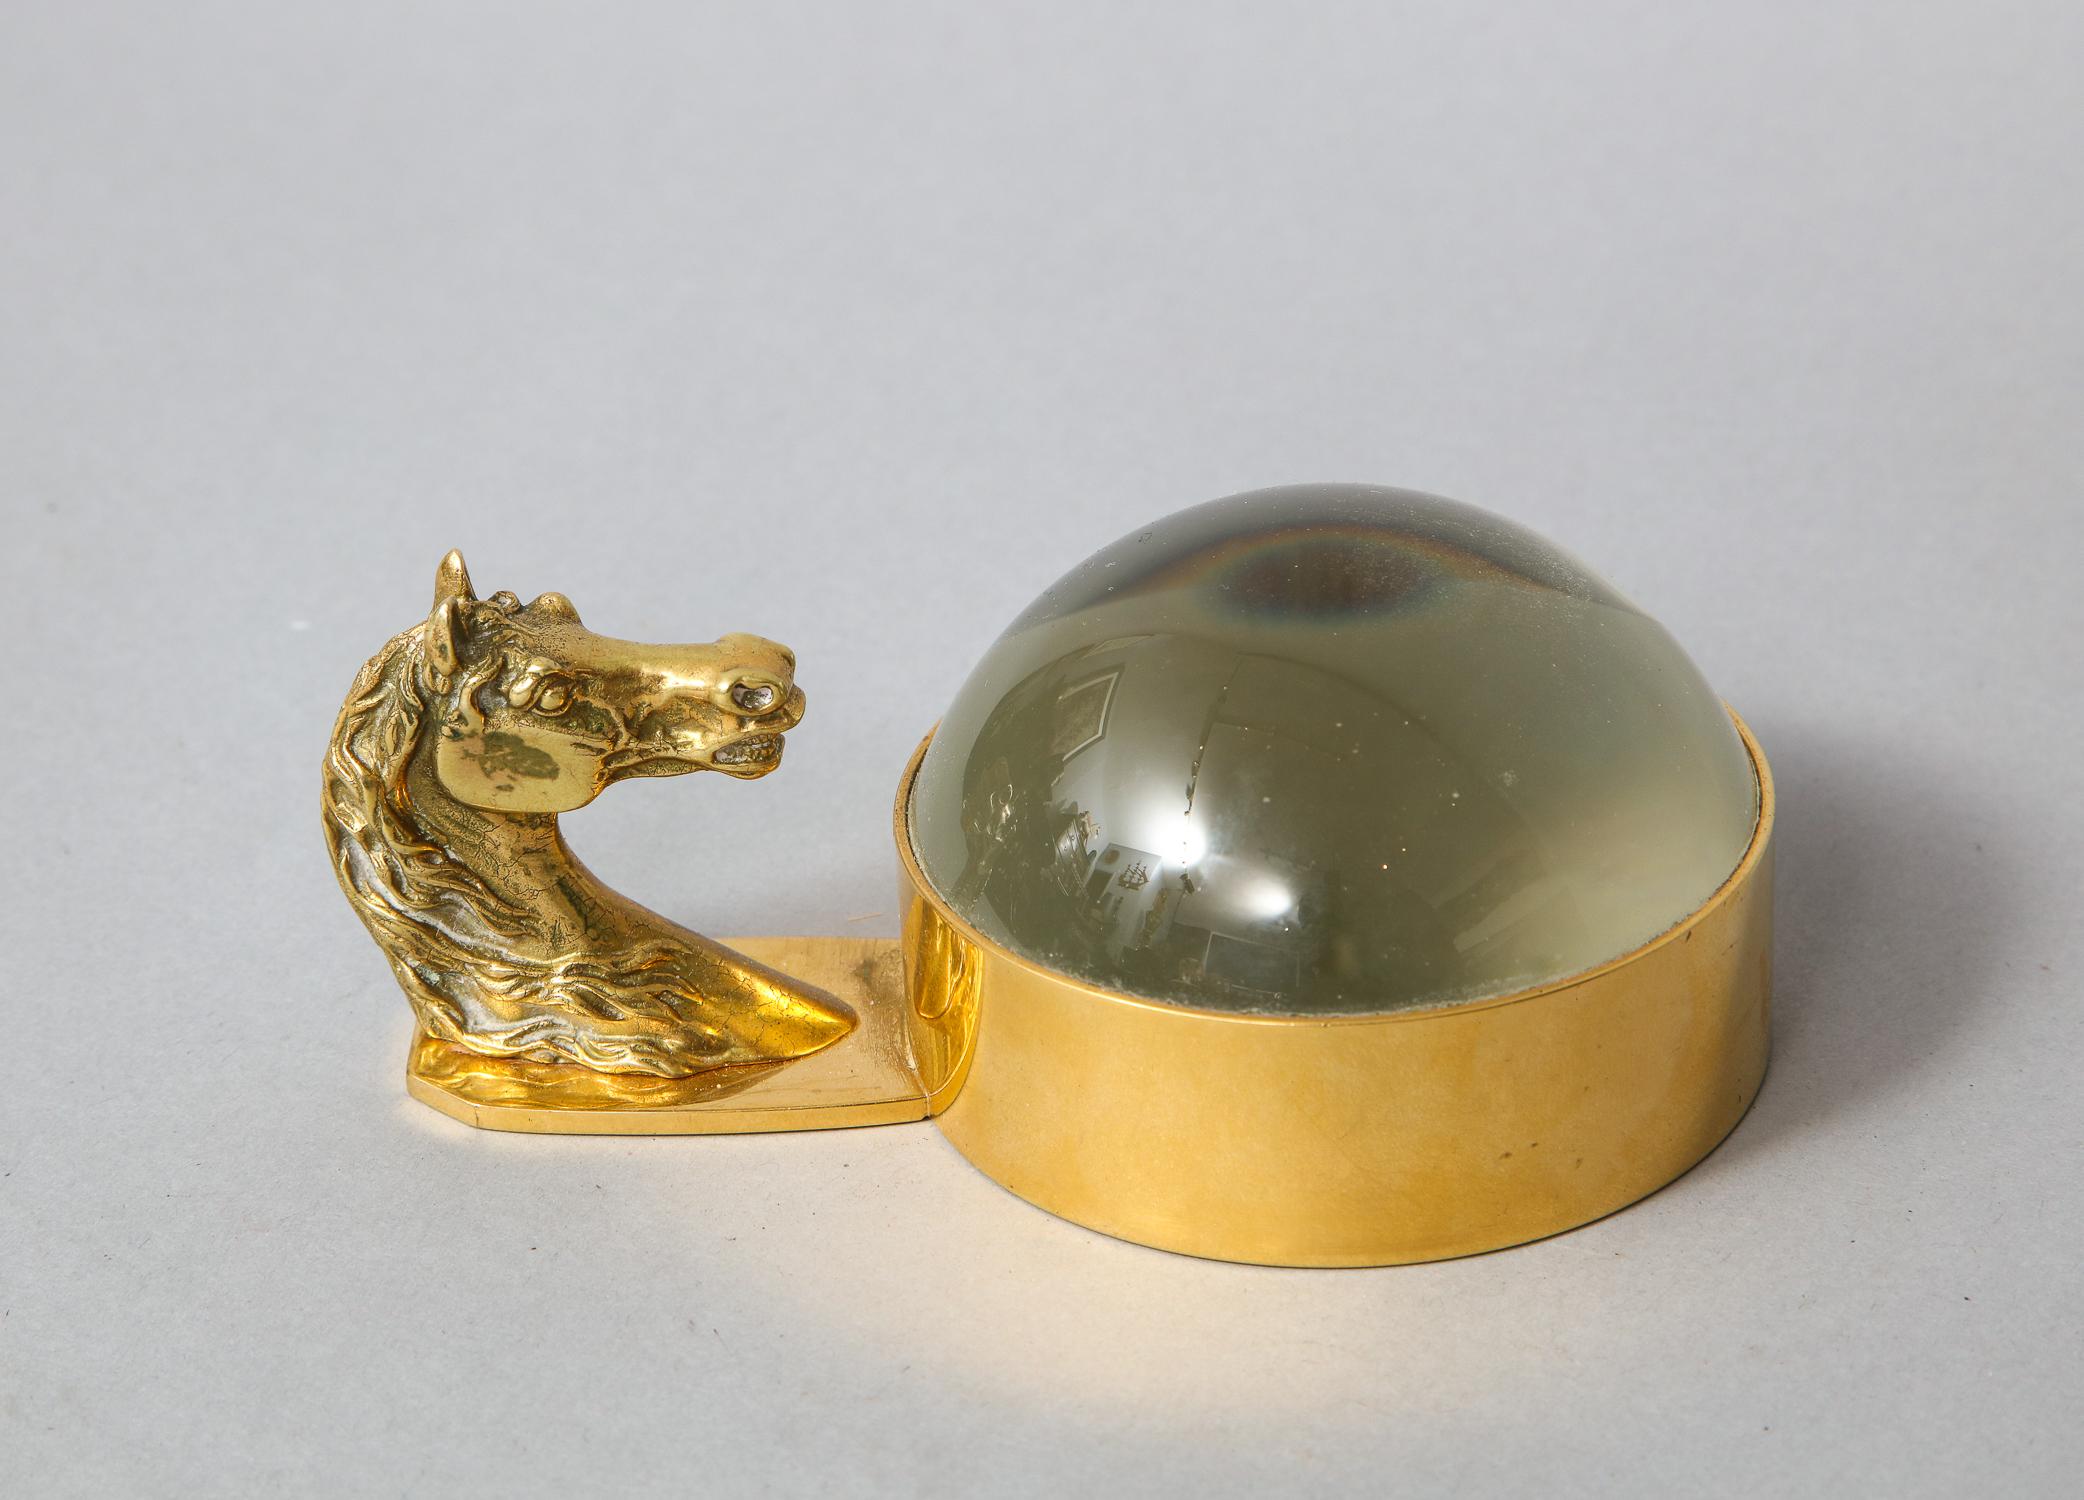 A paperweight with integral domed glass magnifier brass mounting ring and a horse's head handle, stamped Hermes, Paris, circa 1975.